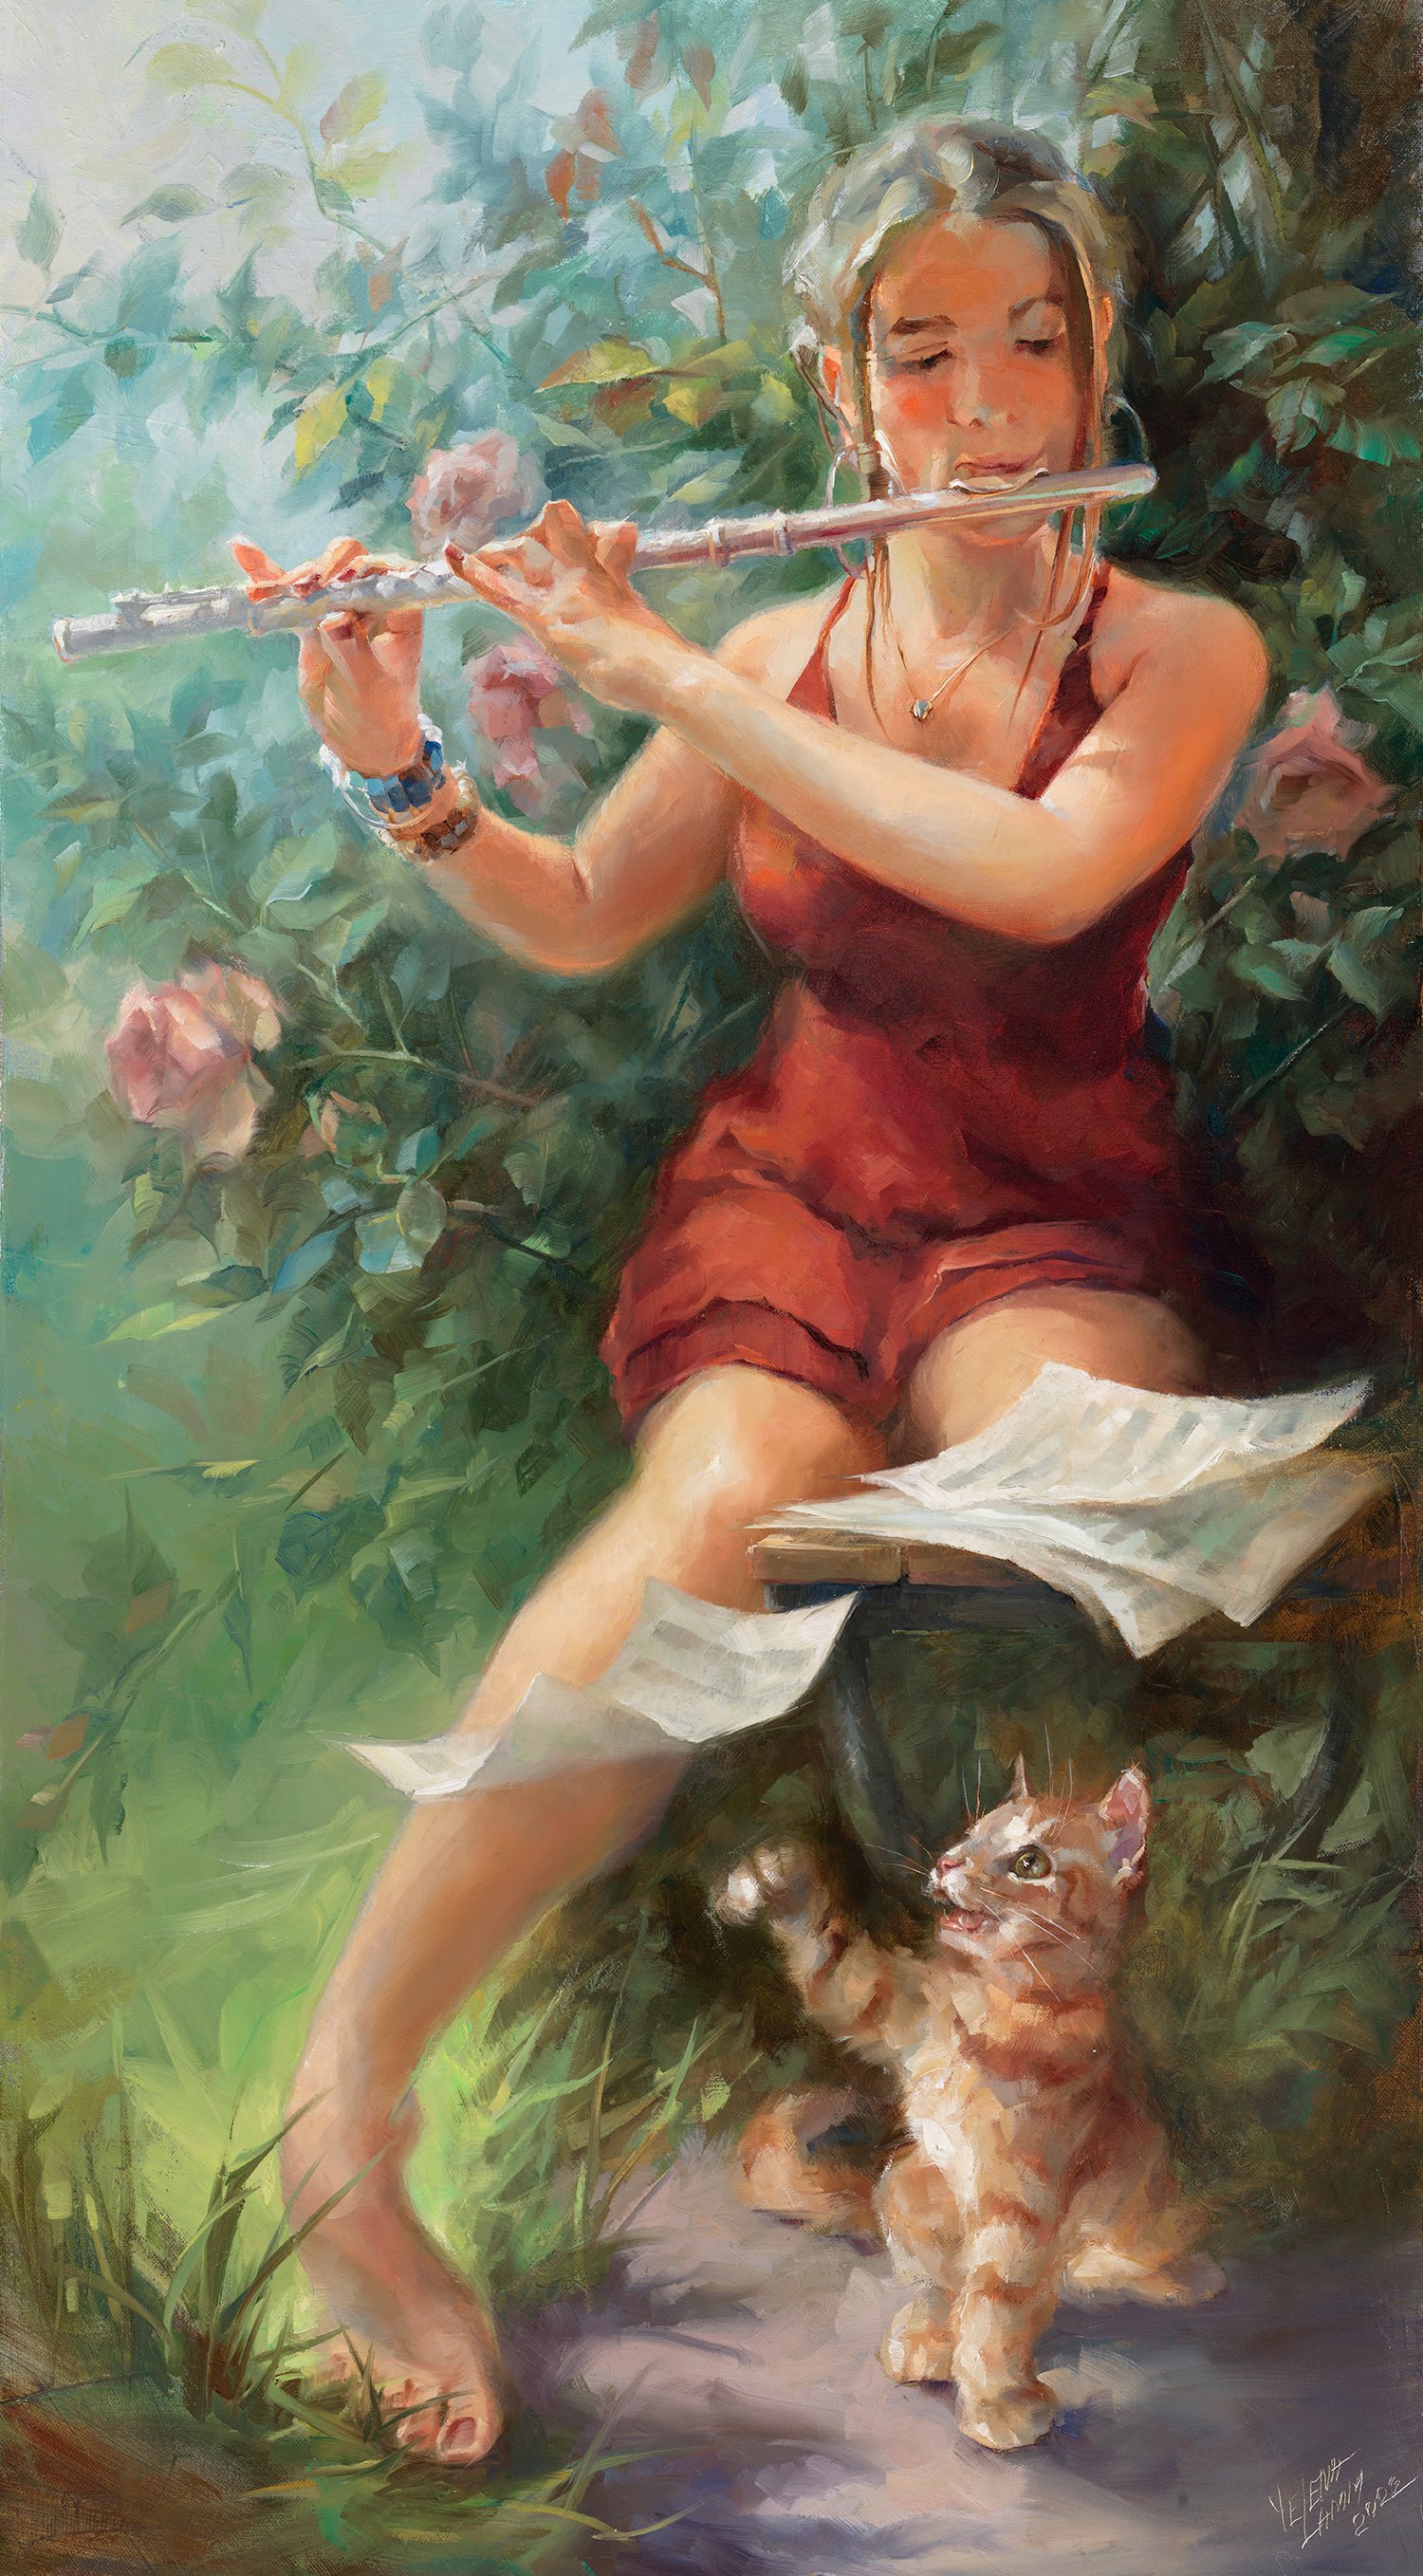   Sunny Melody     36” x 20” oil on linen  Available through    Main Exhibit Gallery   